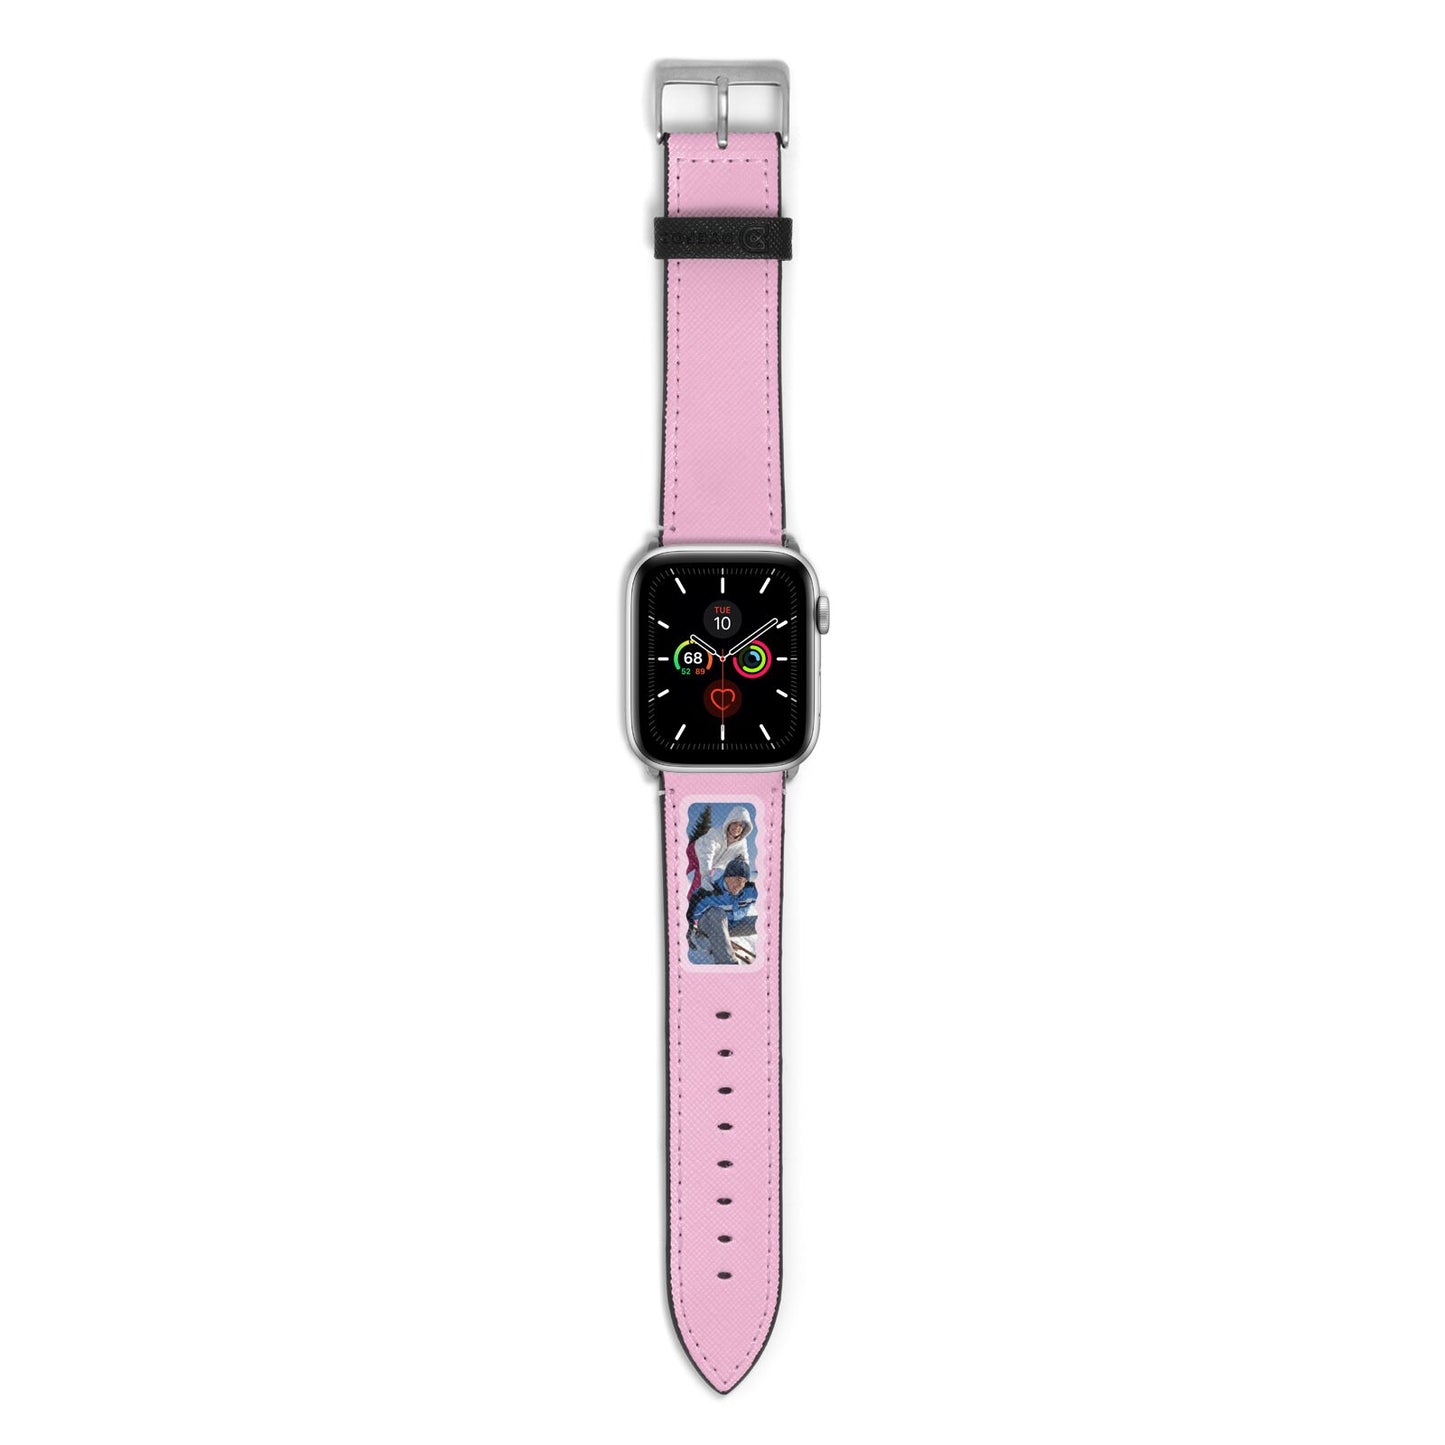 Wavy Photo Border Apple Watch Strap with Silver Hardware